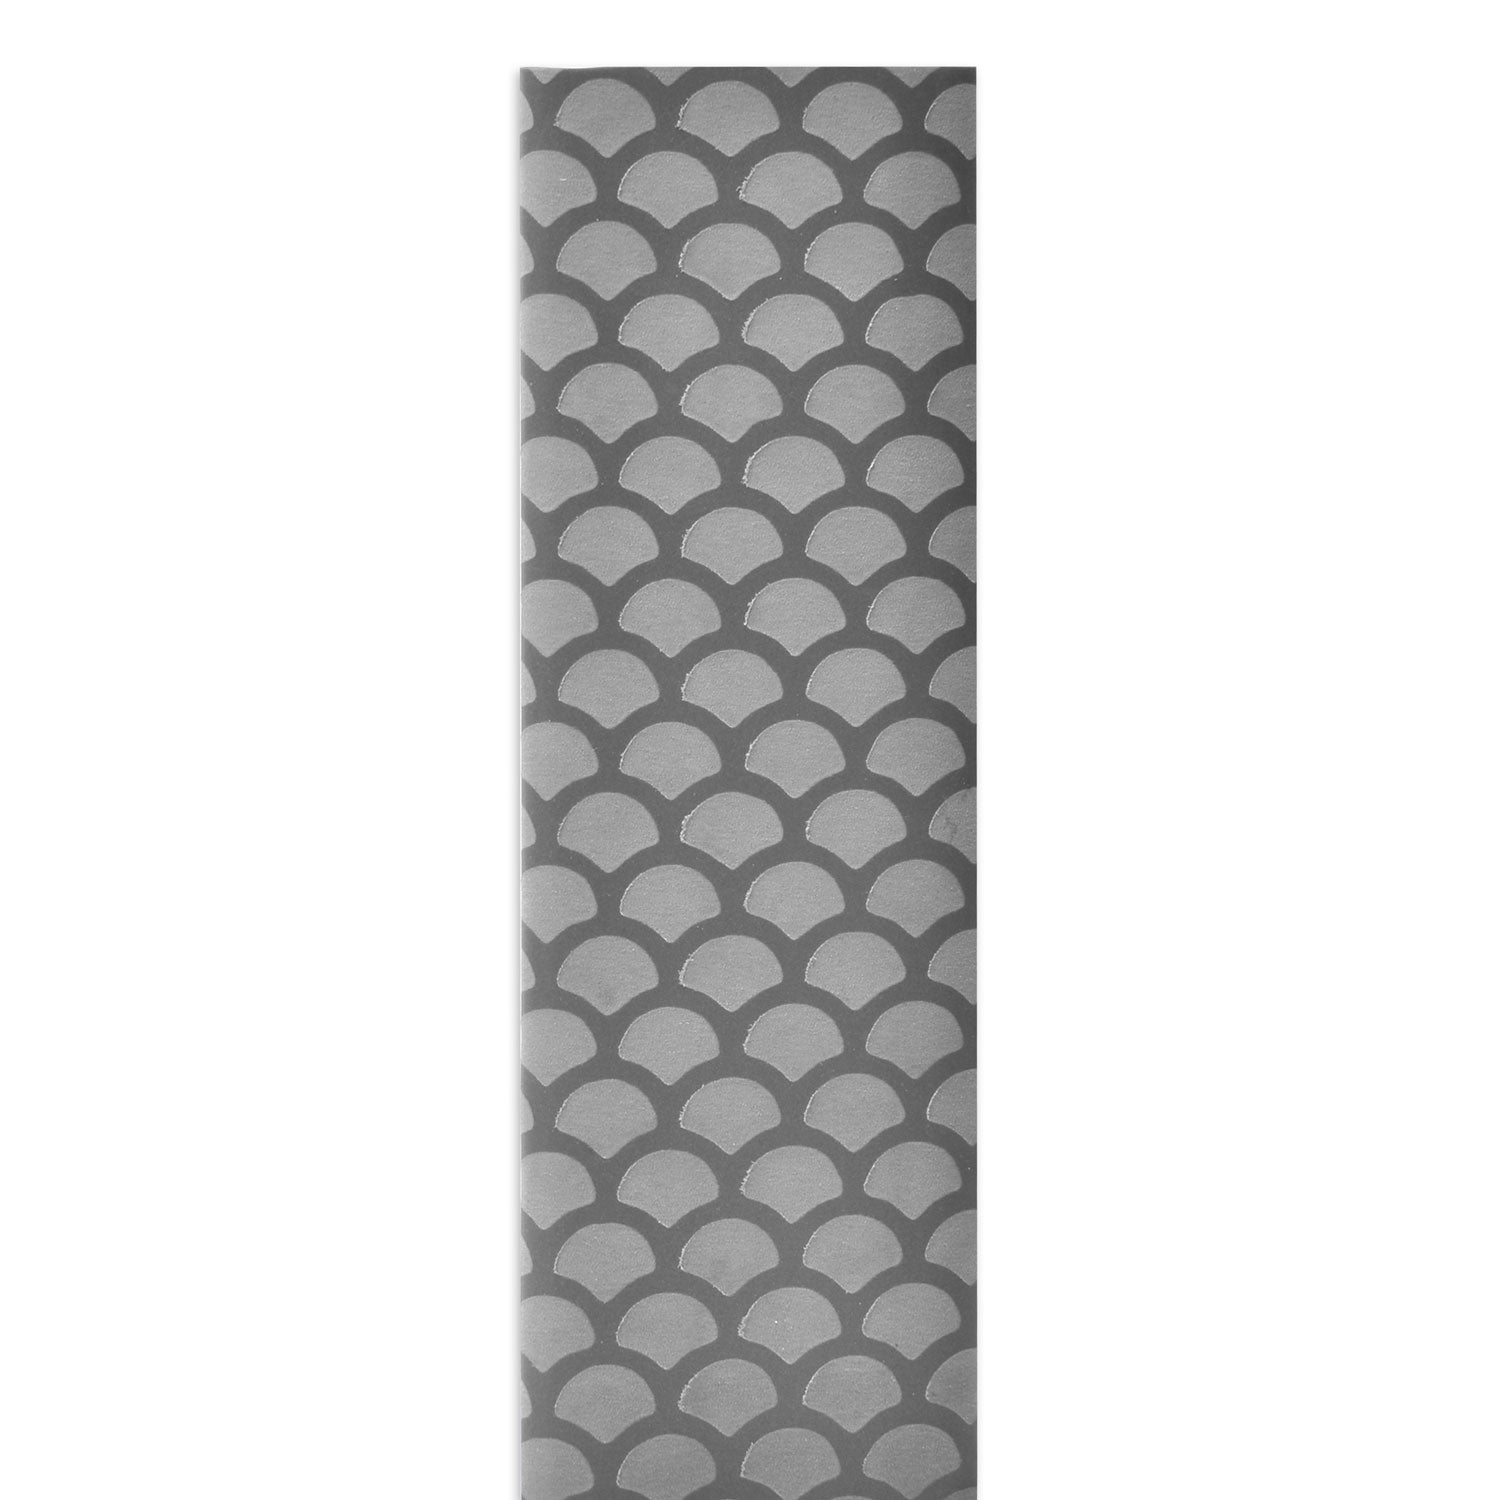 Fish Scale Pattern Shrink Tube - Shrink Tubes - Tools, misc